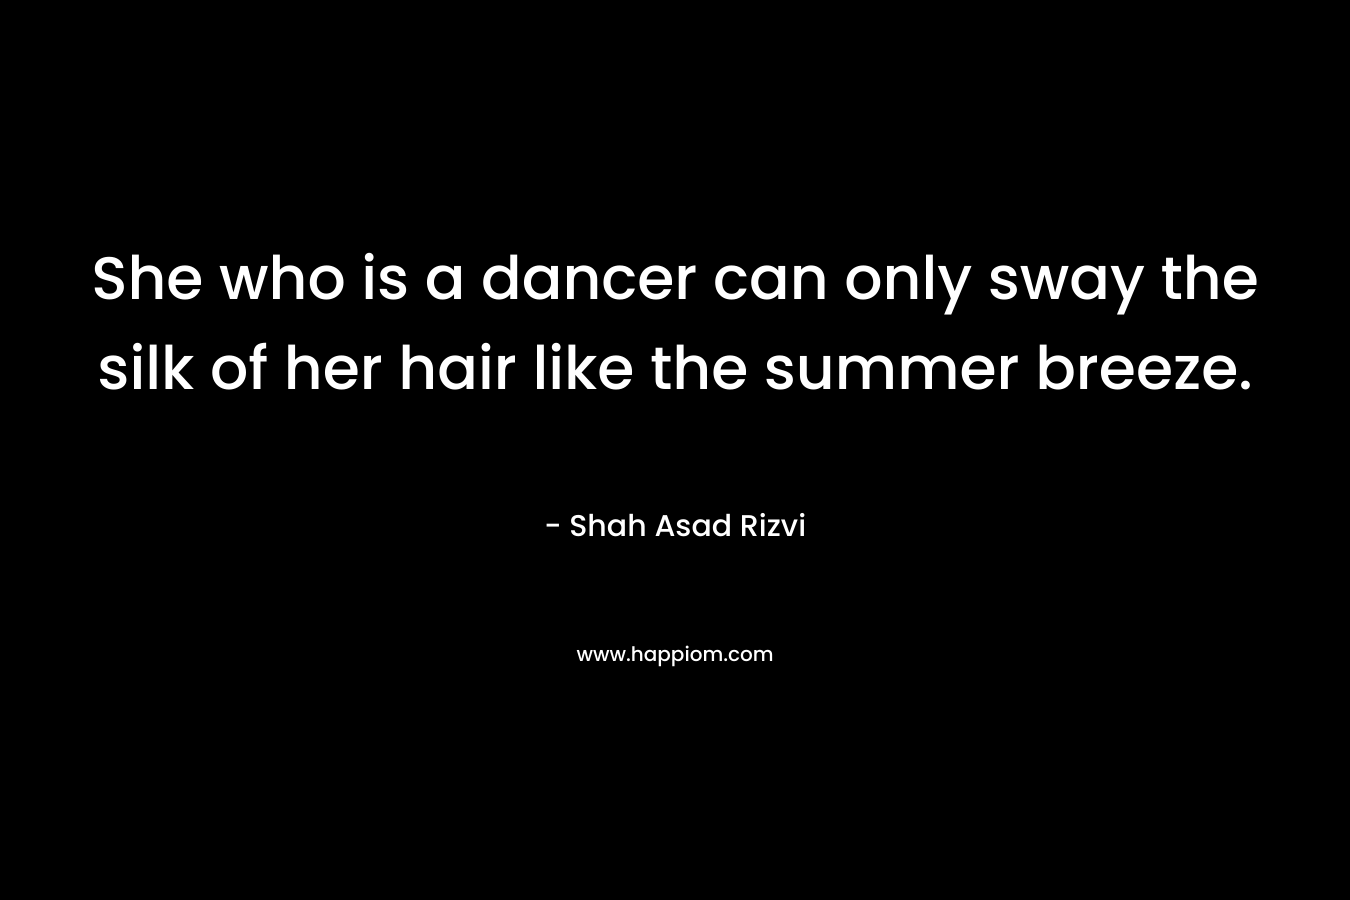 She who is a dancer can only sway the silk of her hair like the summer breeze. – Shah Asad Rizvi